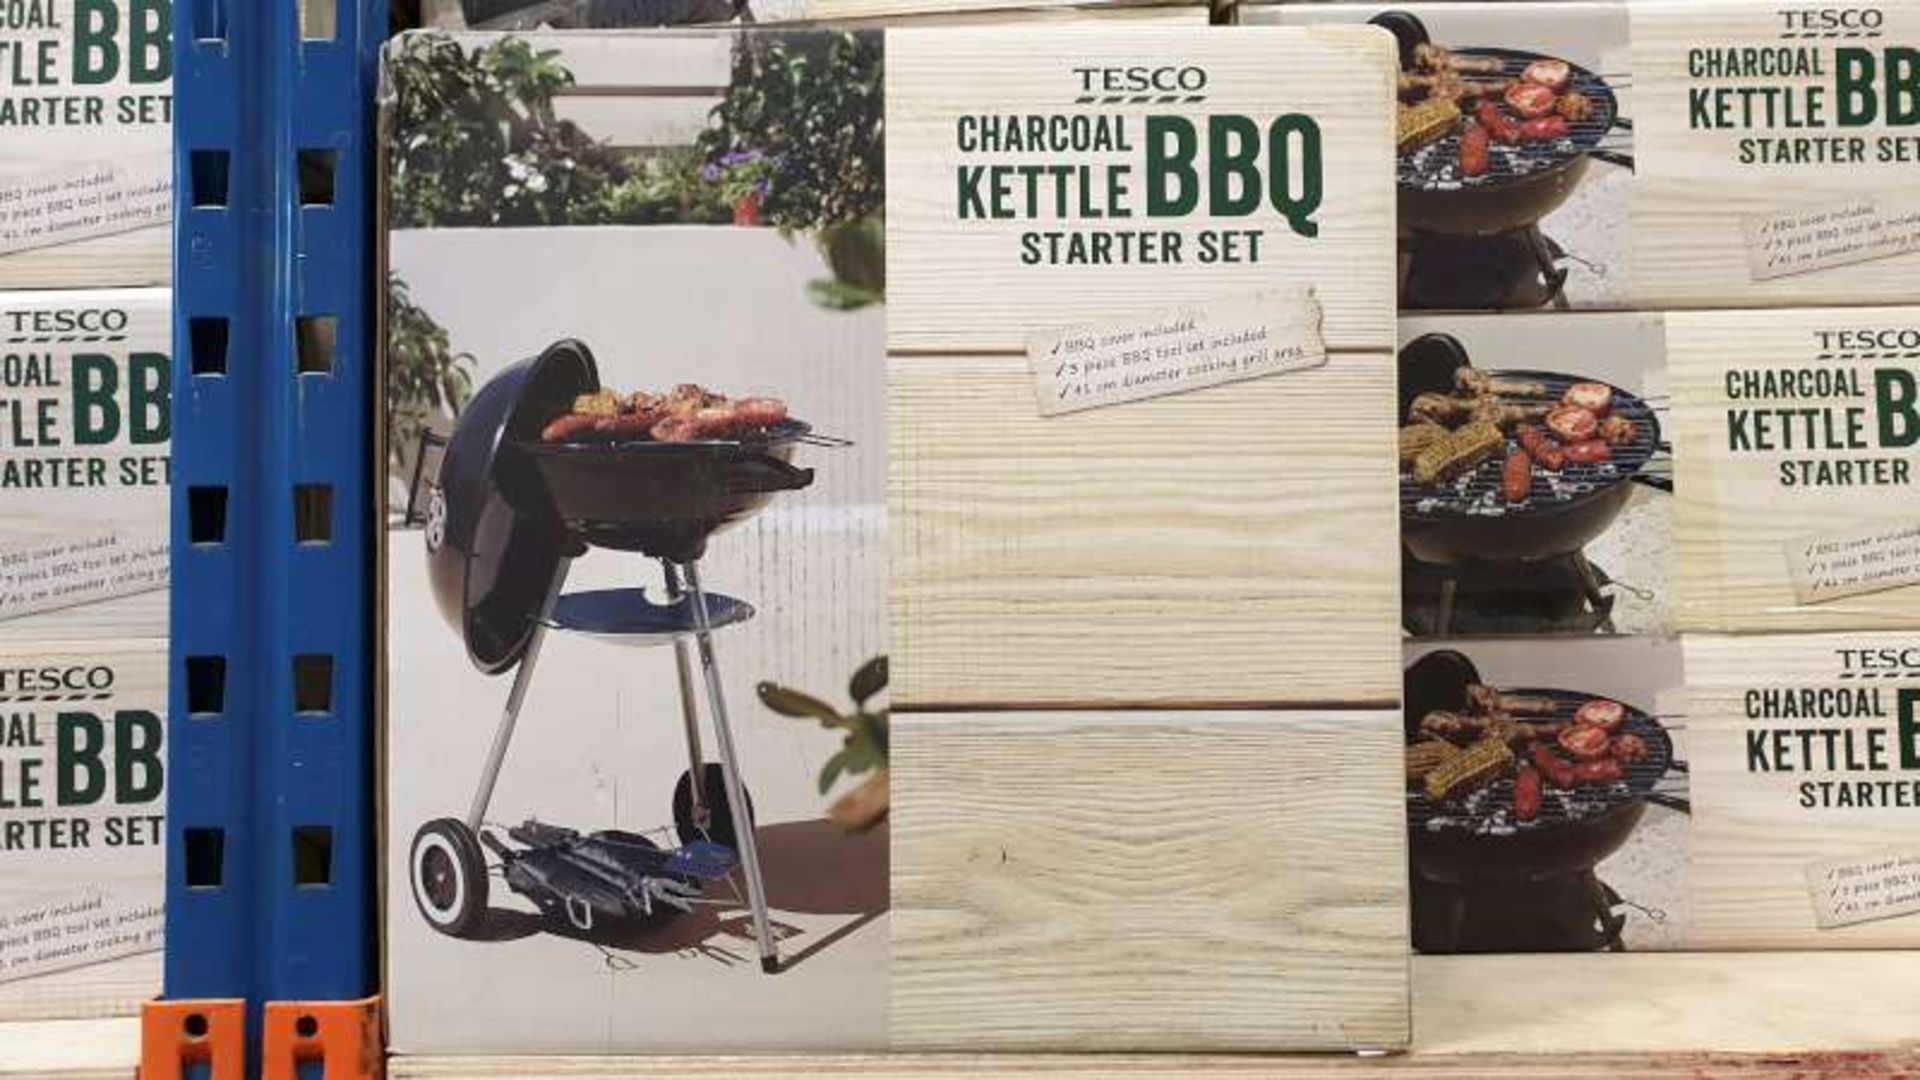 8 X BRAND NEW BOXED CHARCOAL KETTLE BBQ STARTER SETS